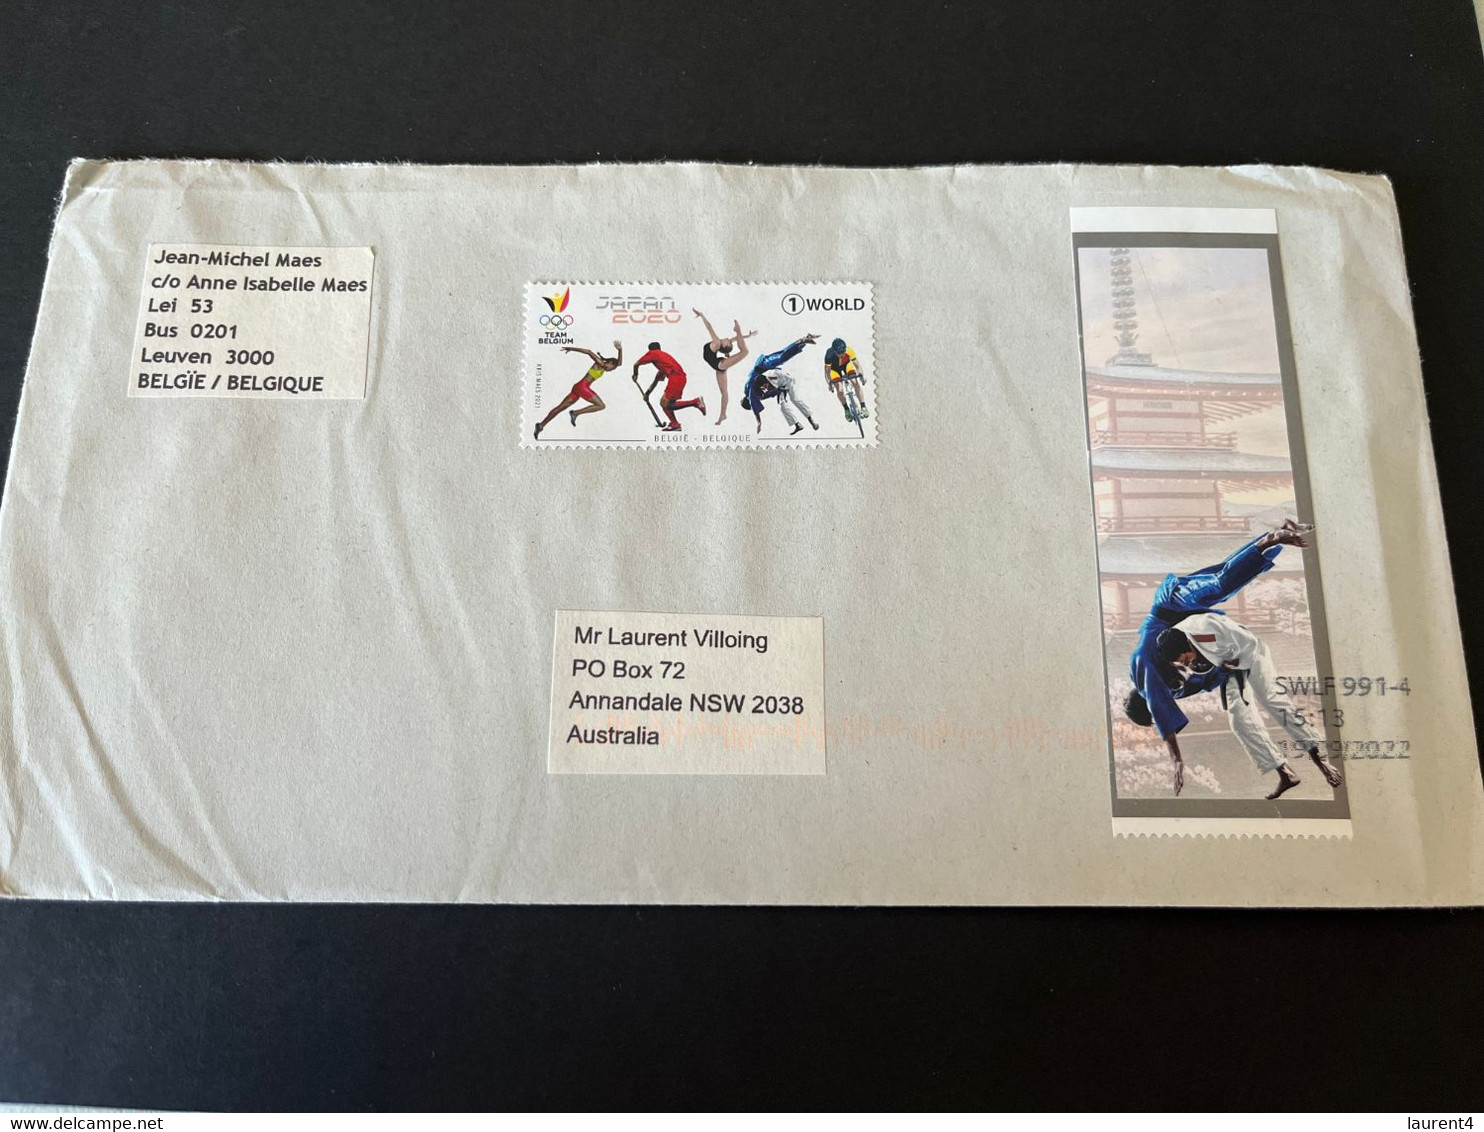 (3 L 54) Letter Posted From Belgium To Australia (during COVID-19 Pandemic) Japan 2000 Olympic Games - Covers & Documents